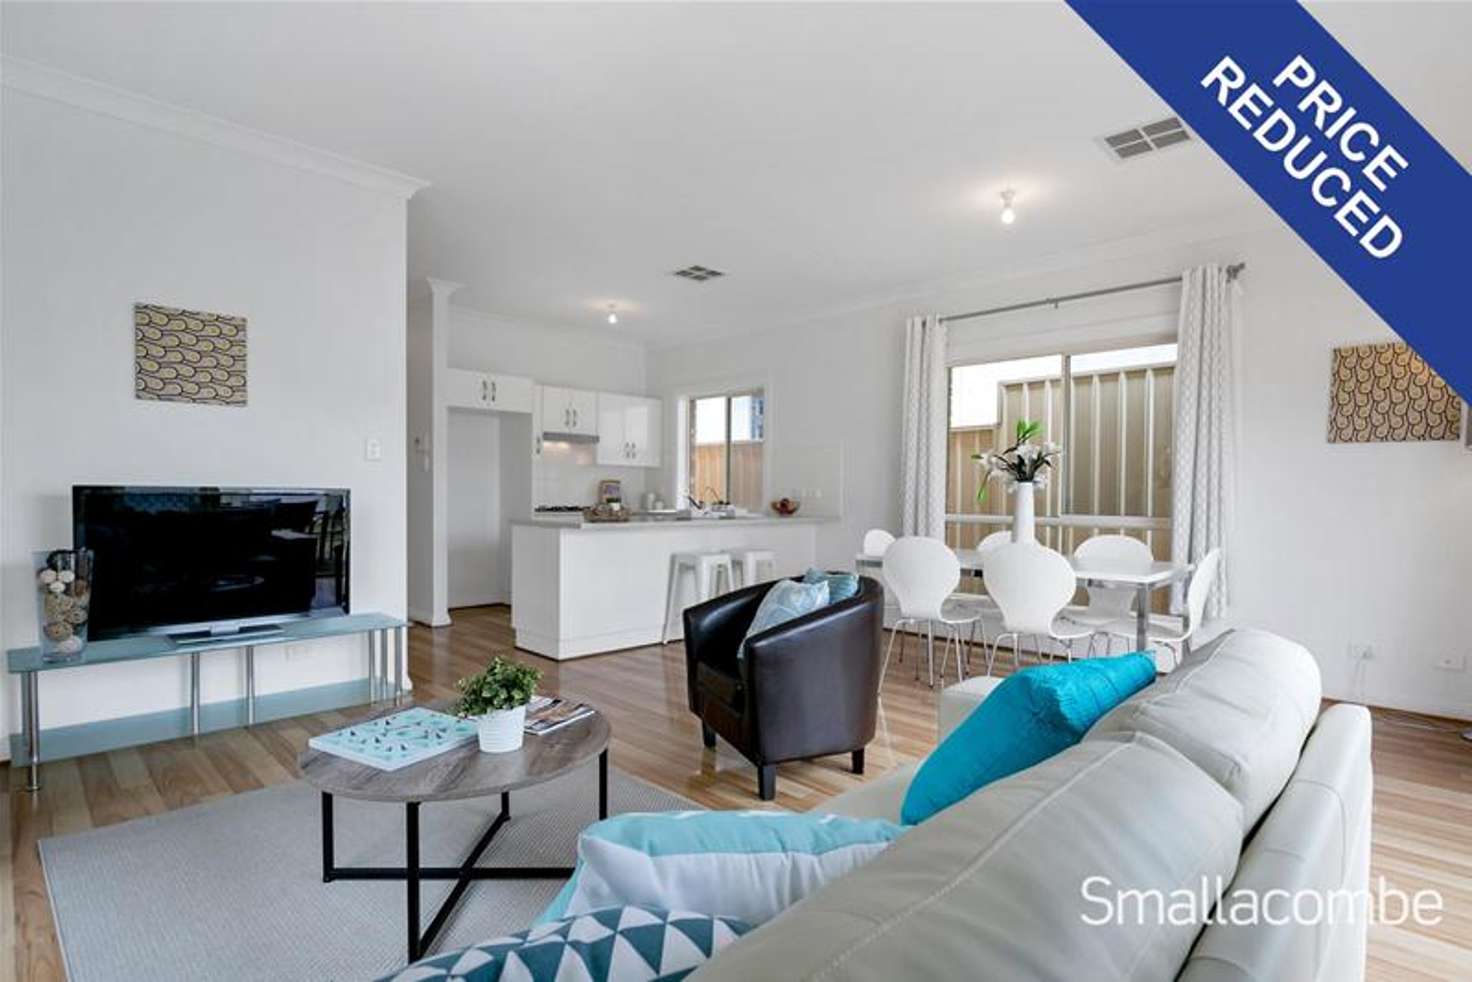 Main view of Homely house listing, 4 Beaconsfield Terrace, Ascot Park SA 5043